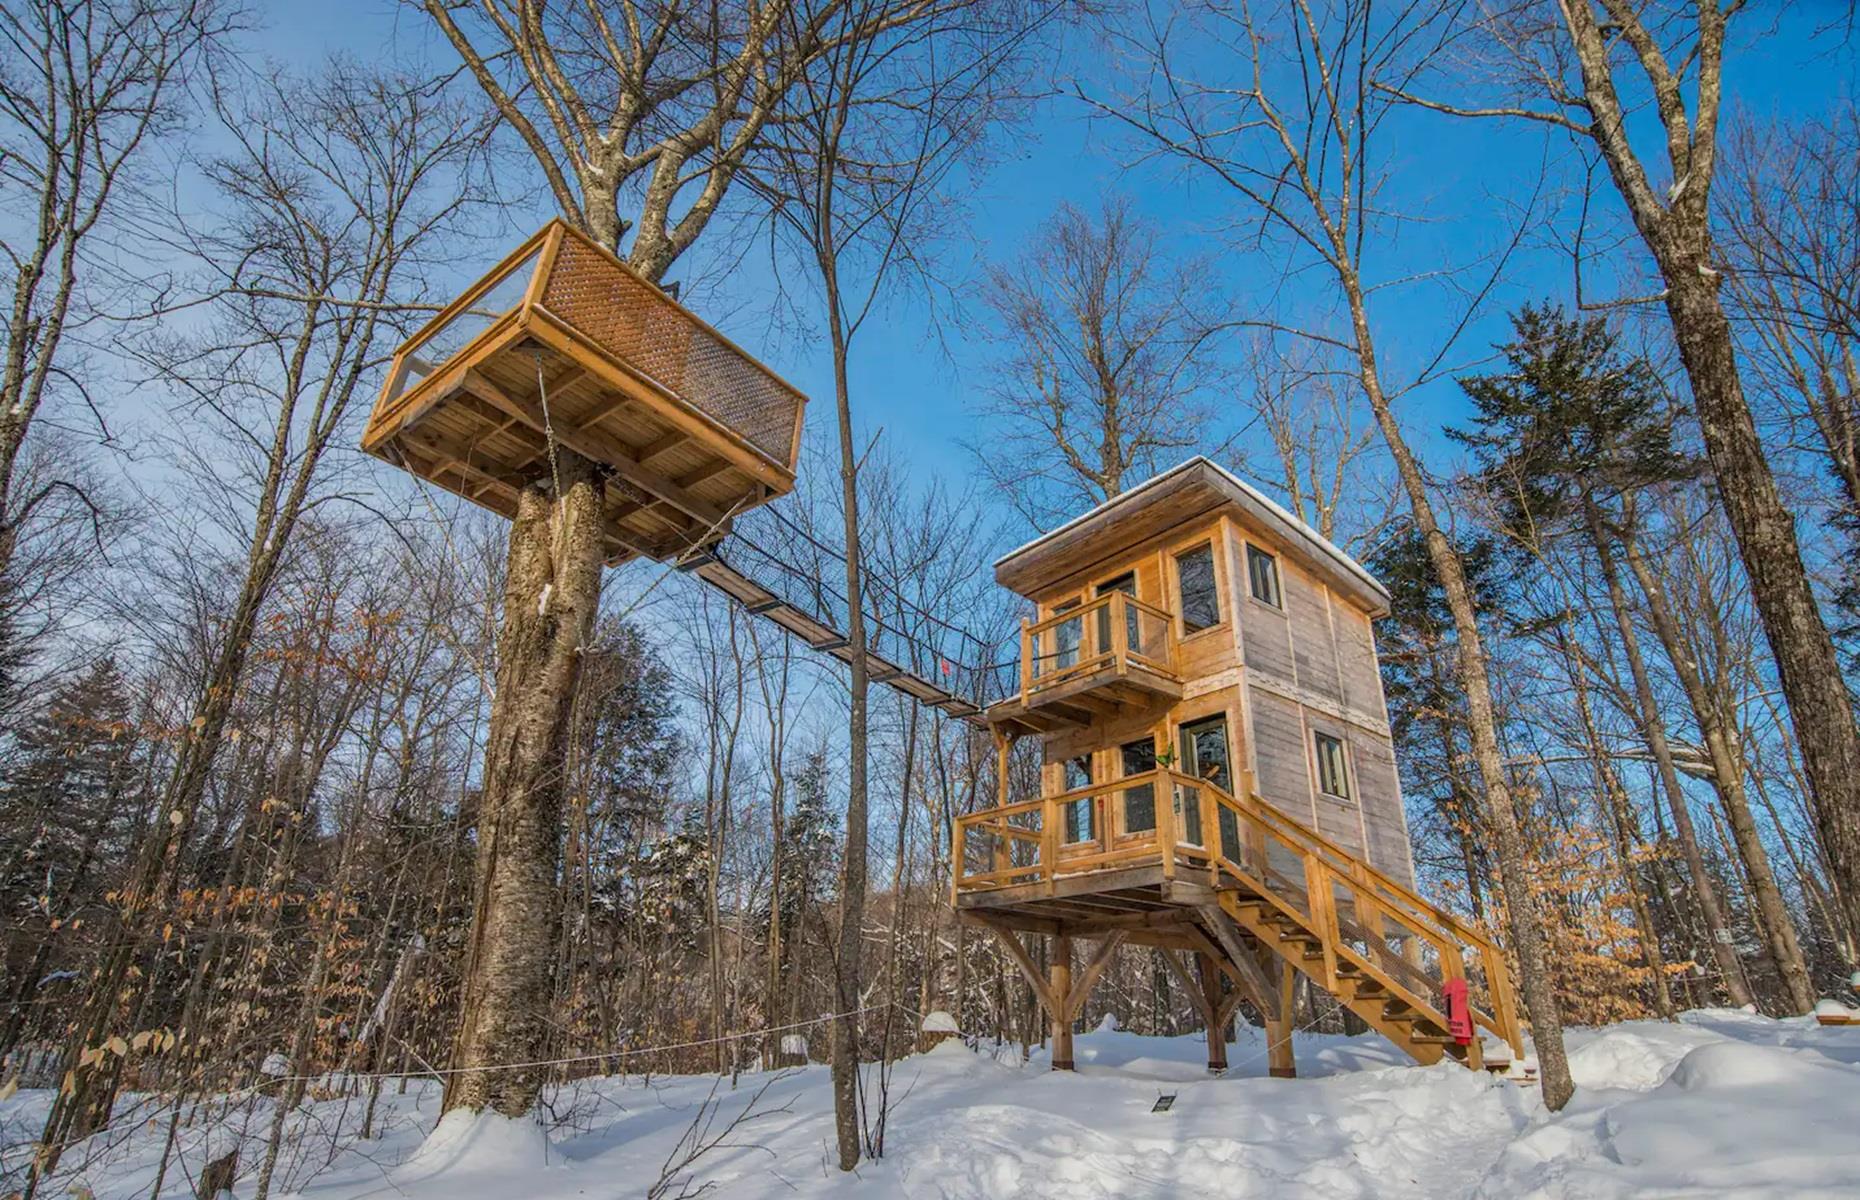 <p>Part treehouse, part getaway tiny house, this compact timber dwelling enjoys a clandestine position deep inside the woodlands of <a href="https://www.airbnb.ca/rooms/2916241?sug=50&source_impression_id=p3_1582056352_23Ck6Byu5631rWAD">Mont-Tremblant National Park</a>, in Saint-Faustin-Lac-Carré, Quebec. What's even better, the wooden house sits on the edge of a pristine lake and boasts a 2,000-acre playground right outside its front door. Let's take a look inside...</p>